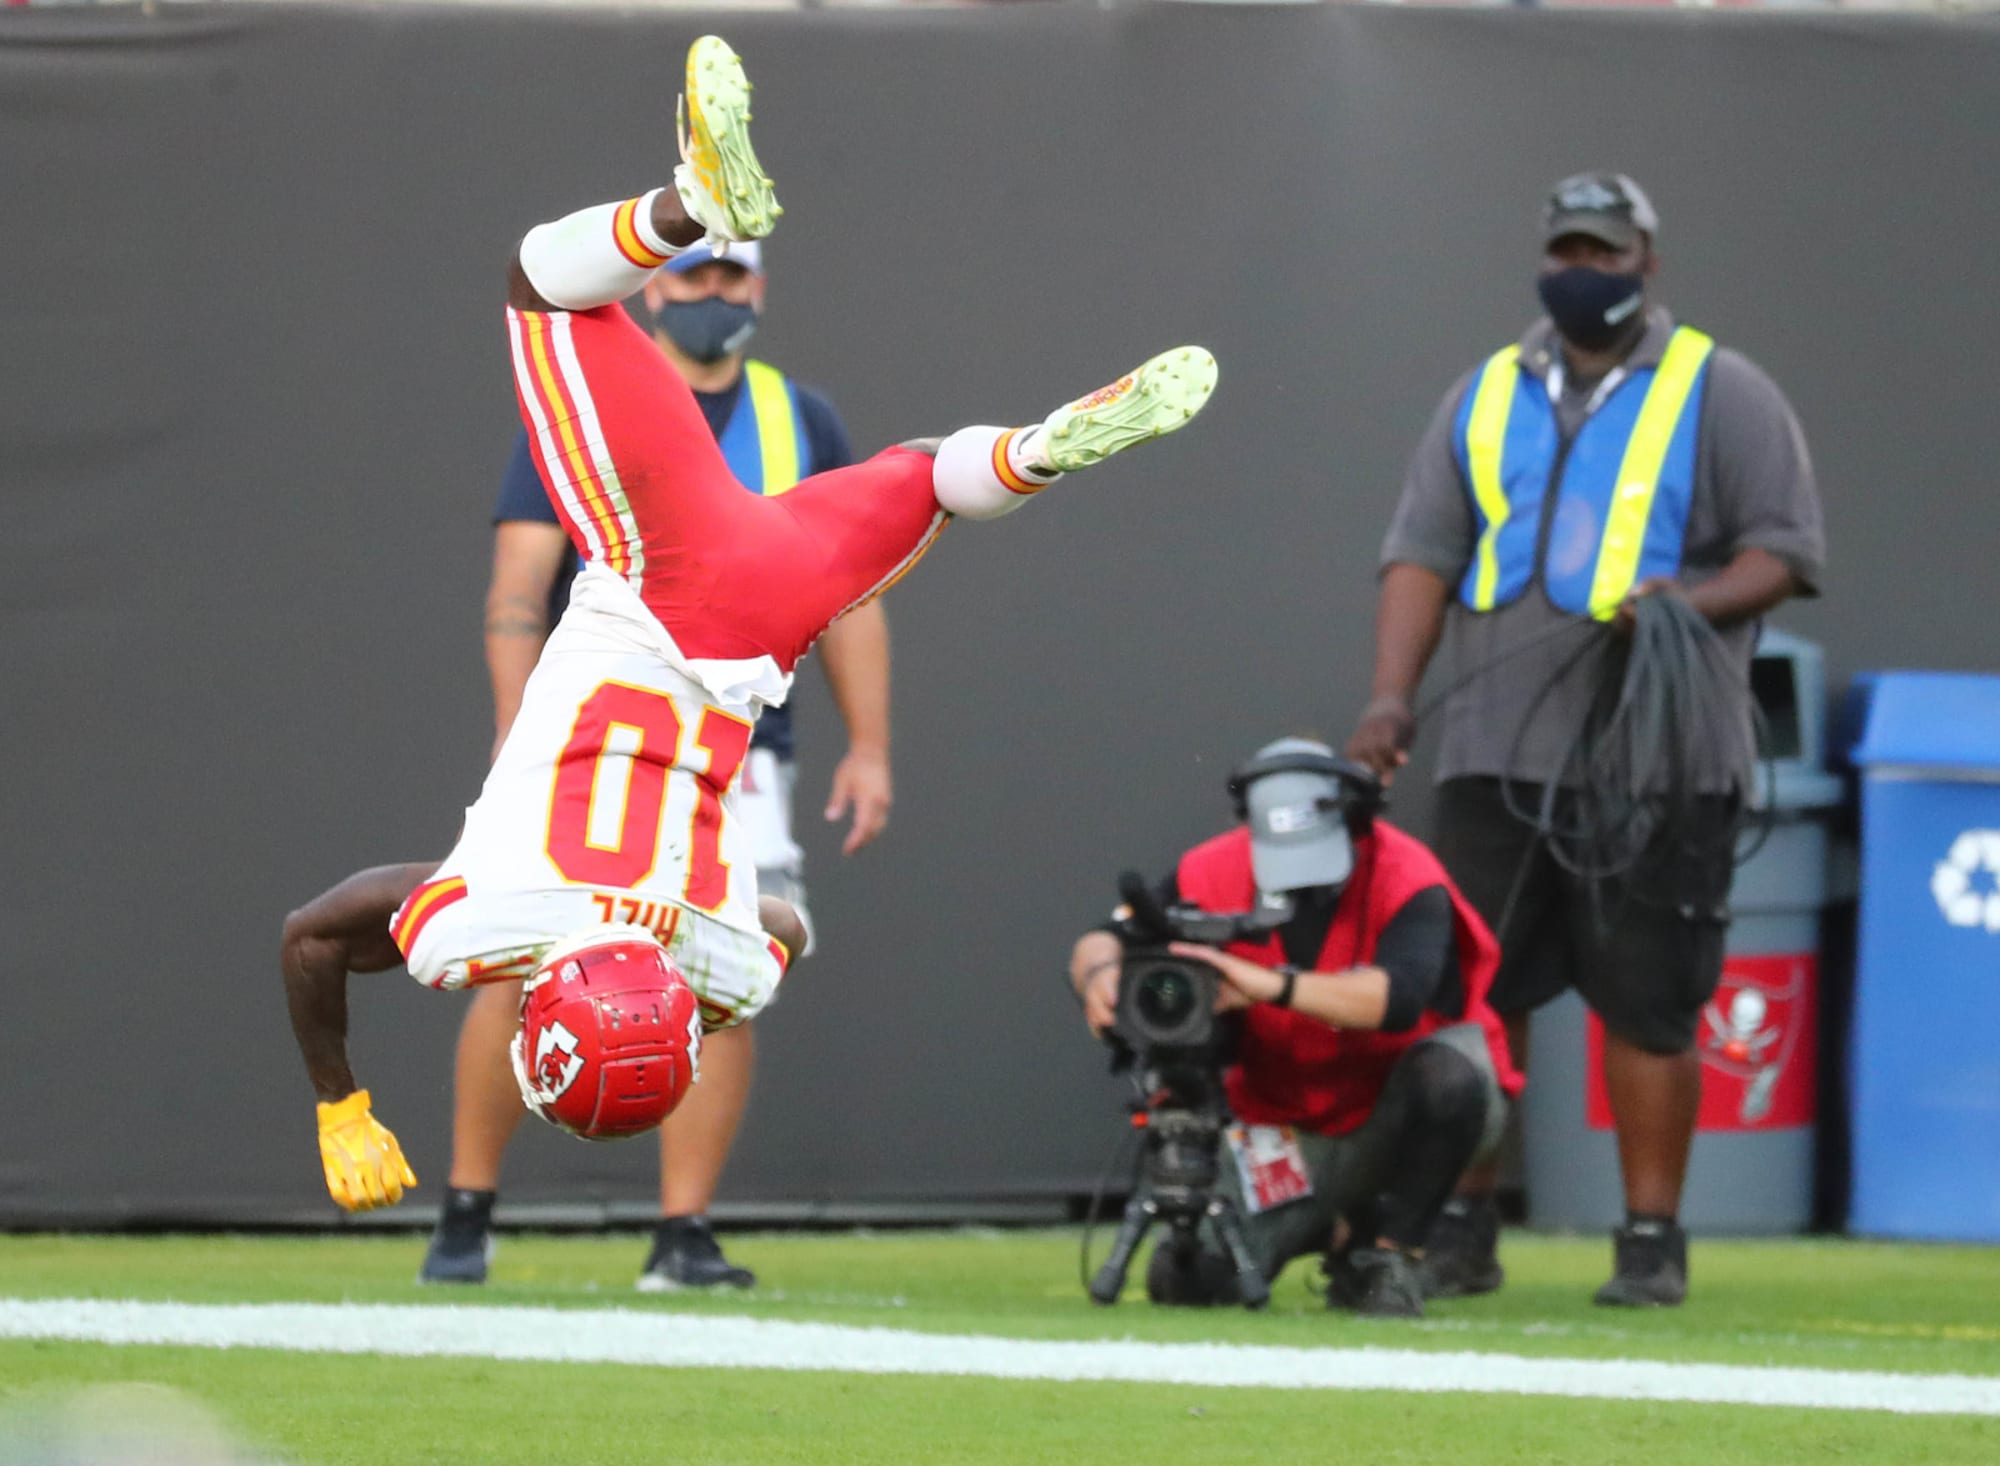 Kansas City Chiefs: Tyreek Hill with the hat trick in win over Buccaneers